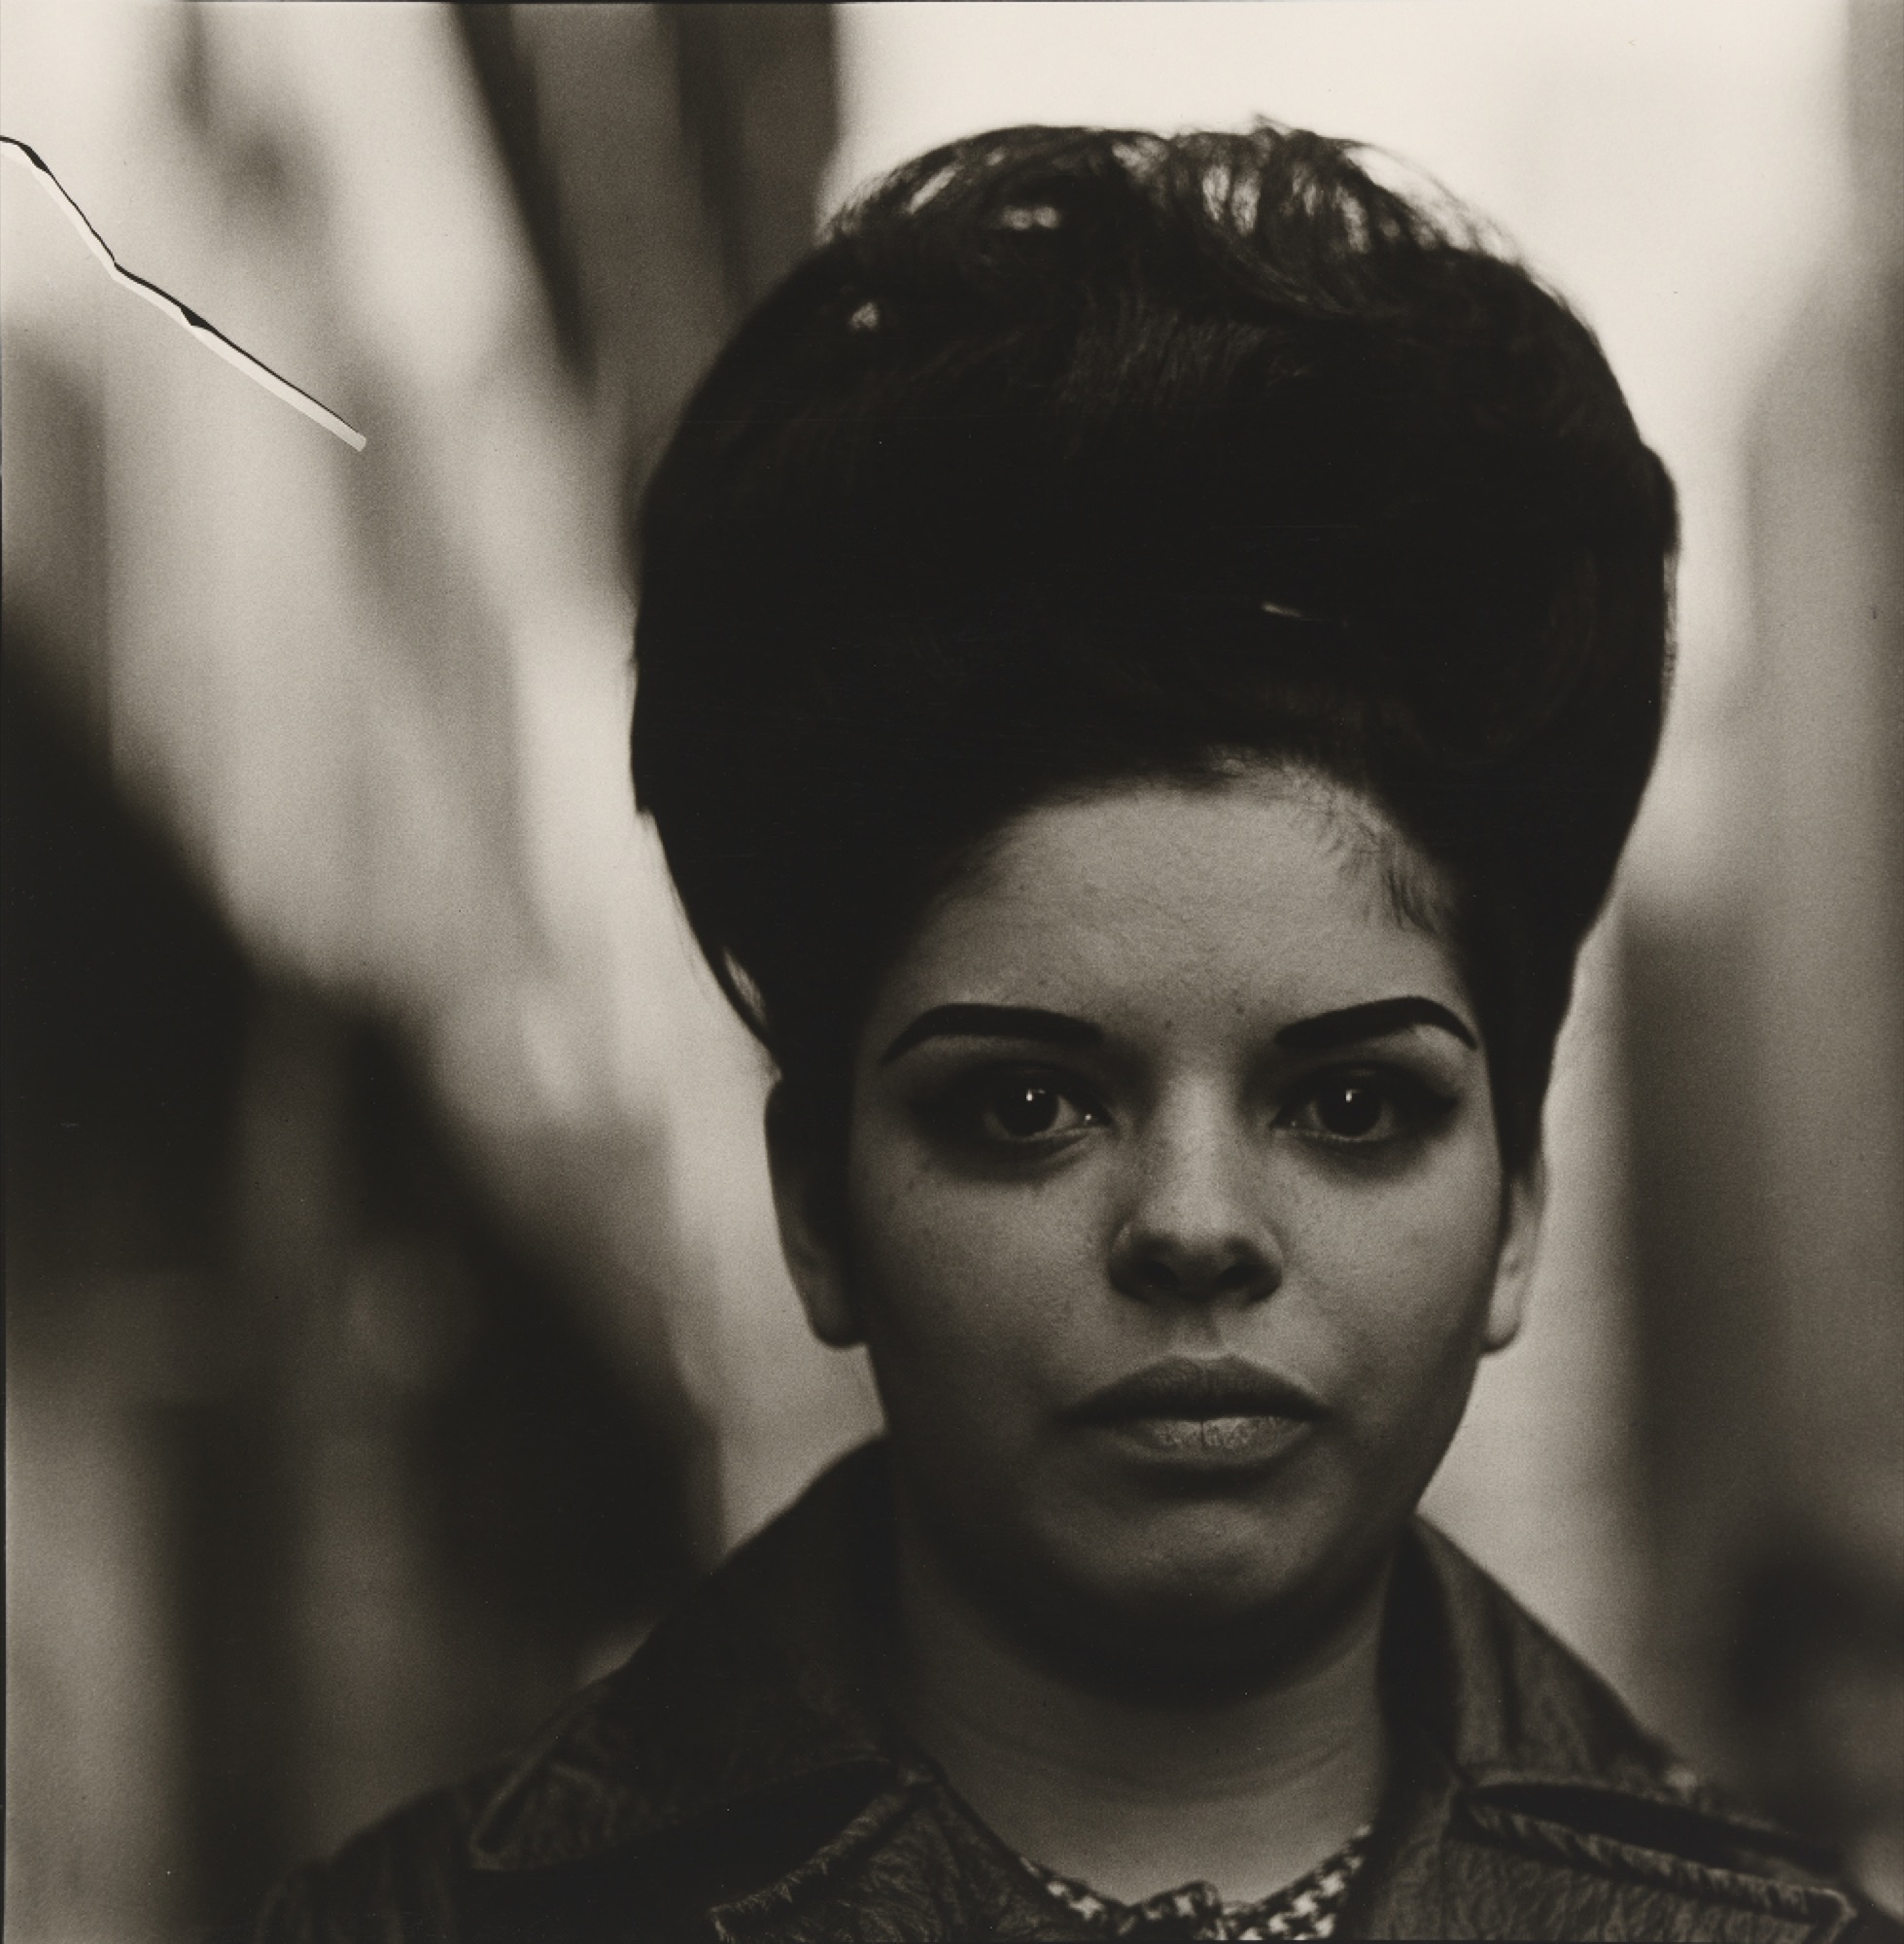 Diane Arbus, <em>Woman with a beehive hairdo</em>, 1965, gelatin silver photograph, National Gallery of Australia, Canberra, Purchased 1981.